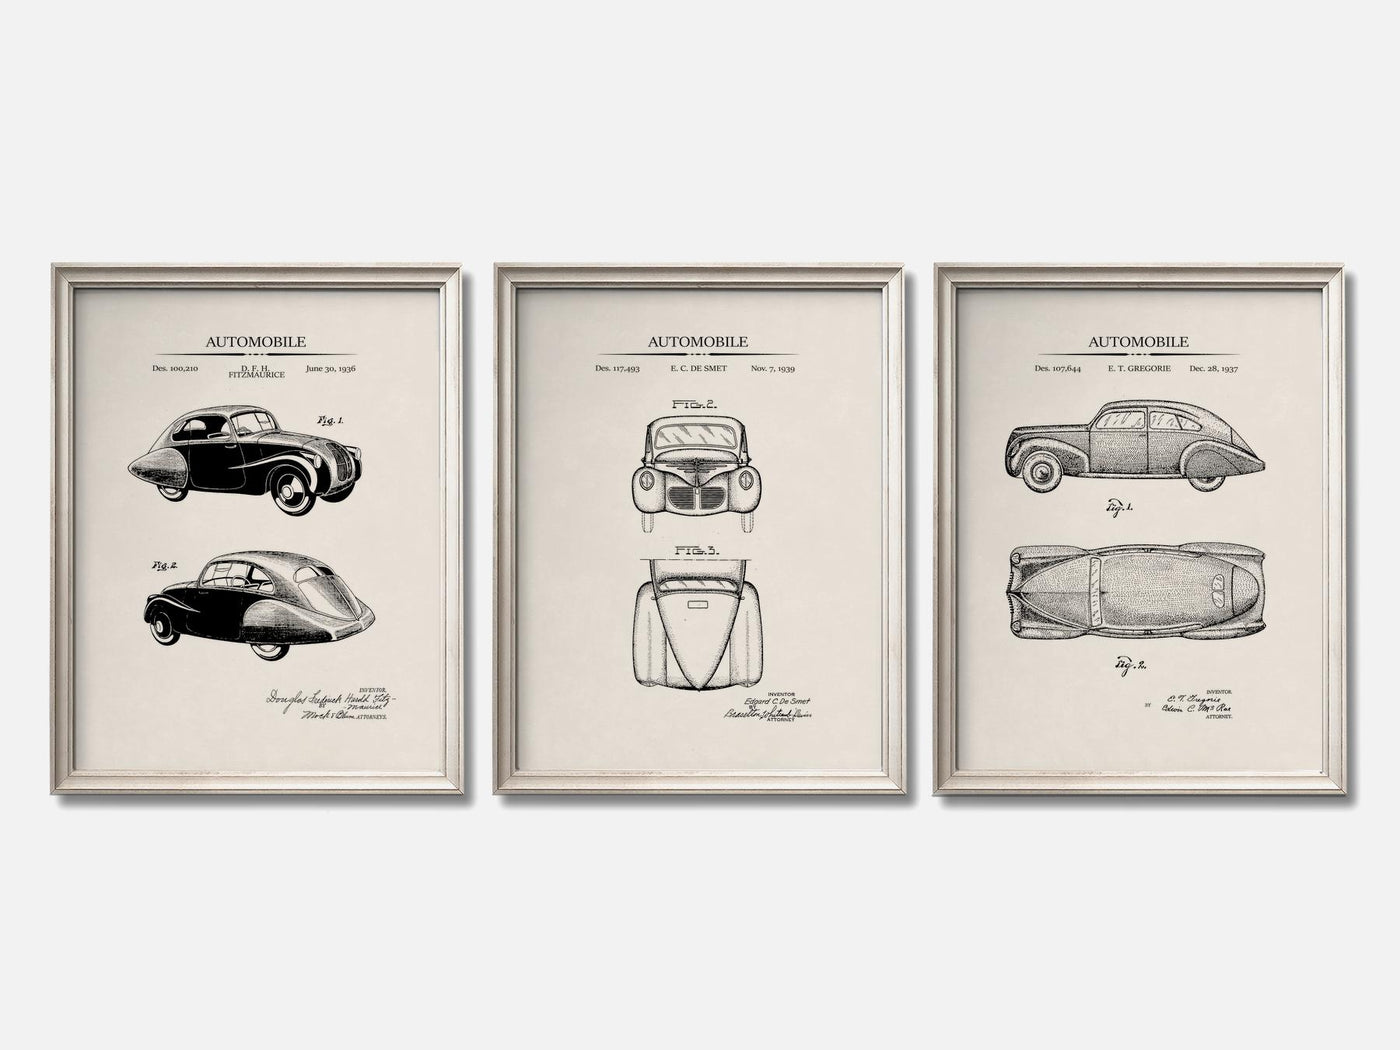 30s Cars Patent Print Set of 3 mockup - A_t10134-V1-PC_F+O-SS_3-PS_11x14-C_ivo variant